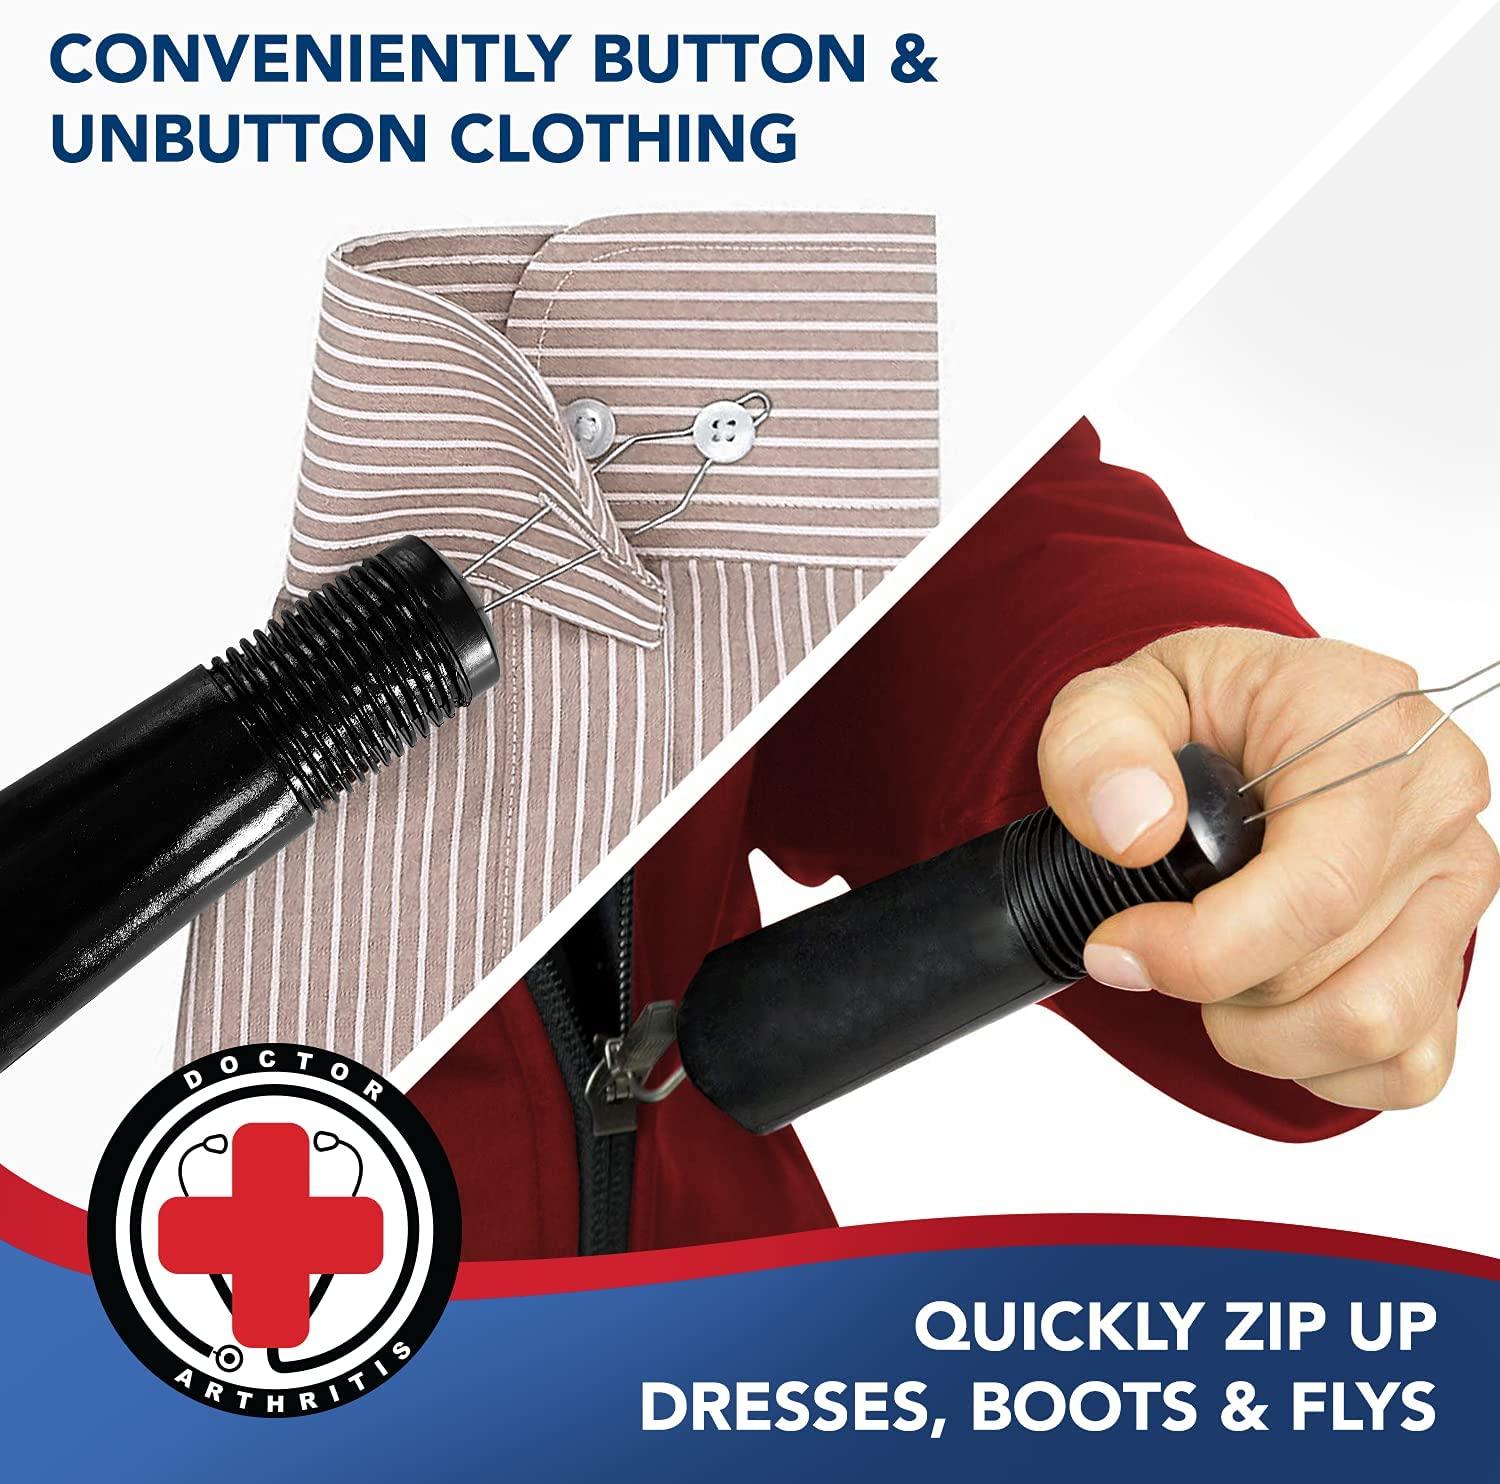 Button Hook & Zipper Pull, Assist, Helper Device, Dress Clothes Tool, Button  Shirts Aid, One Hand, Disability, Handicapped and Seniors by Dr. Arthritis  (Single)